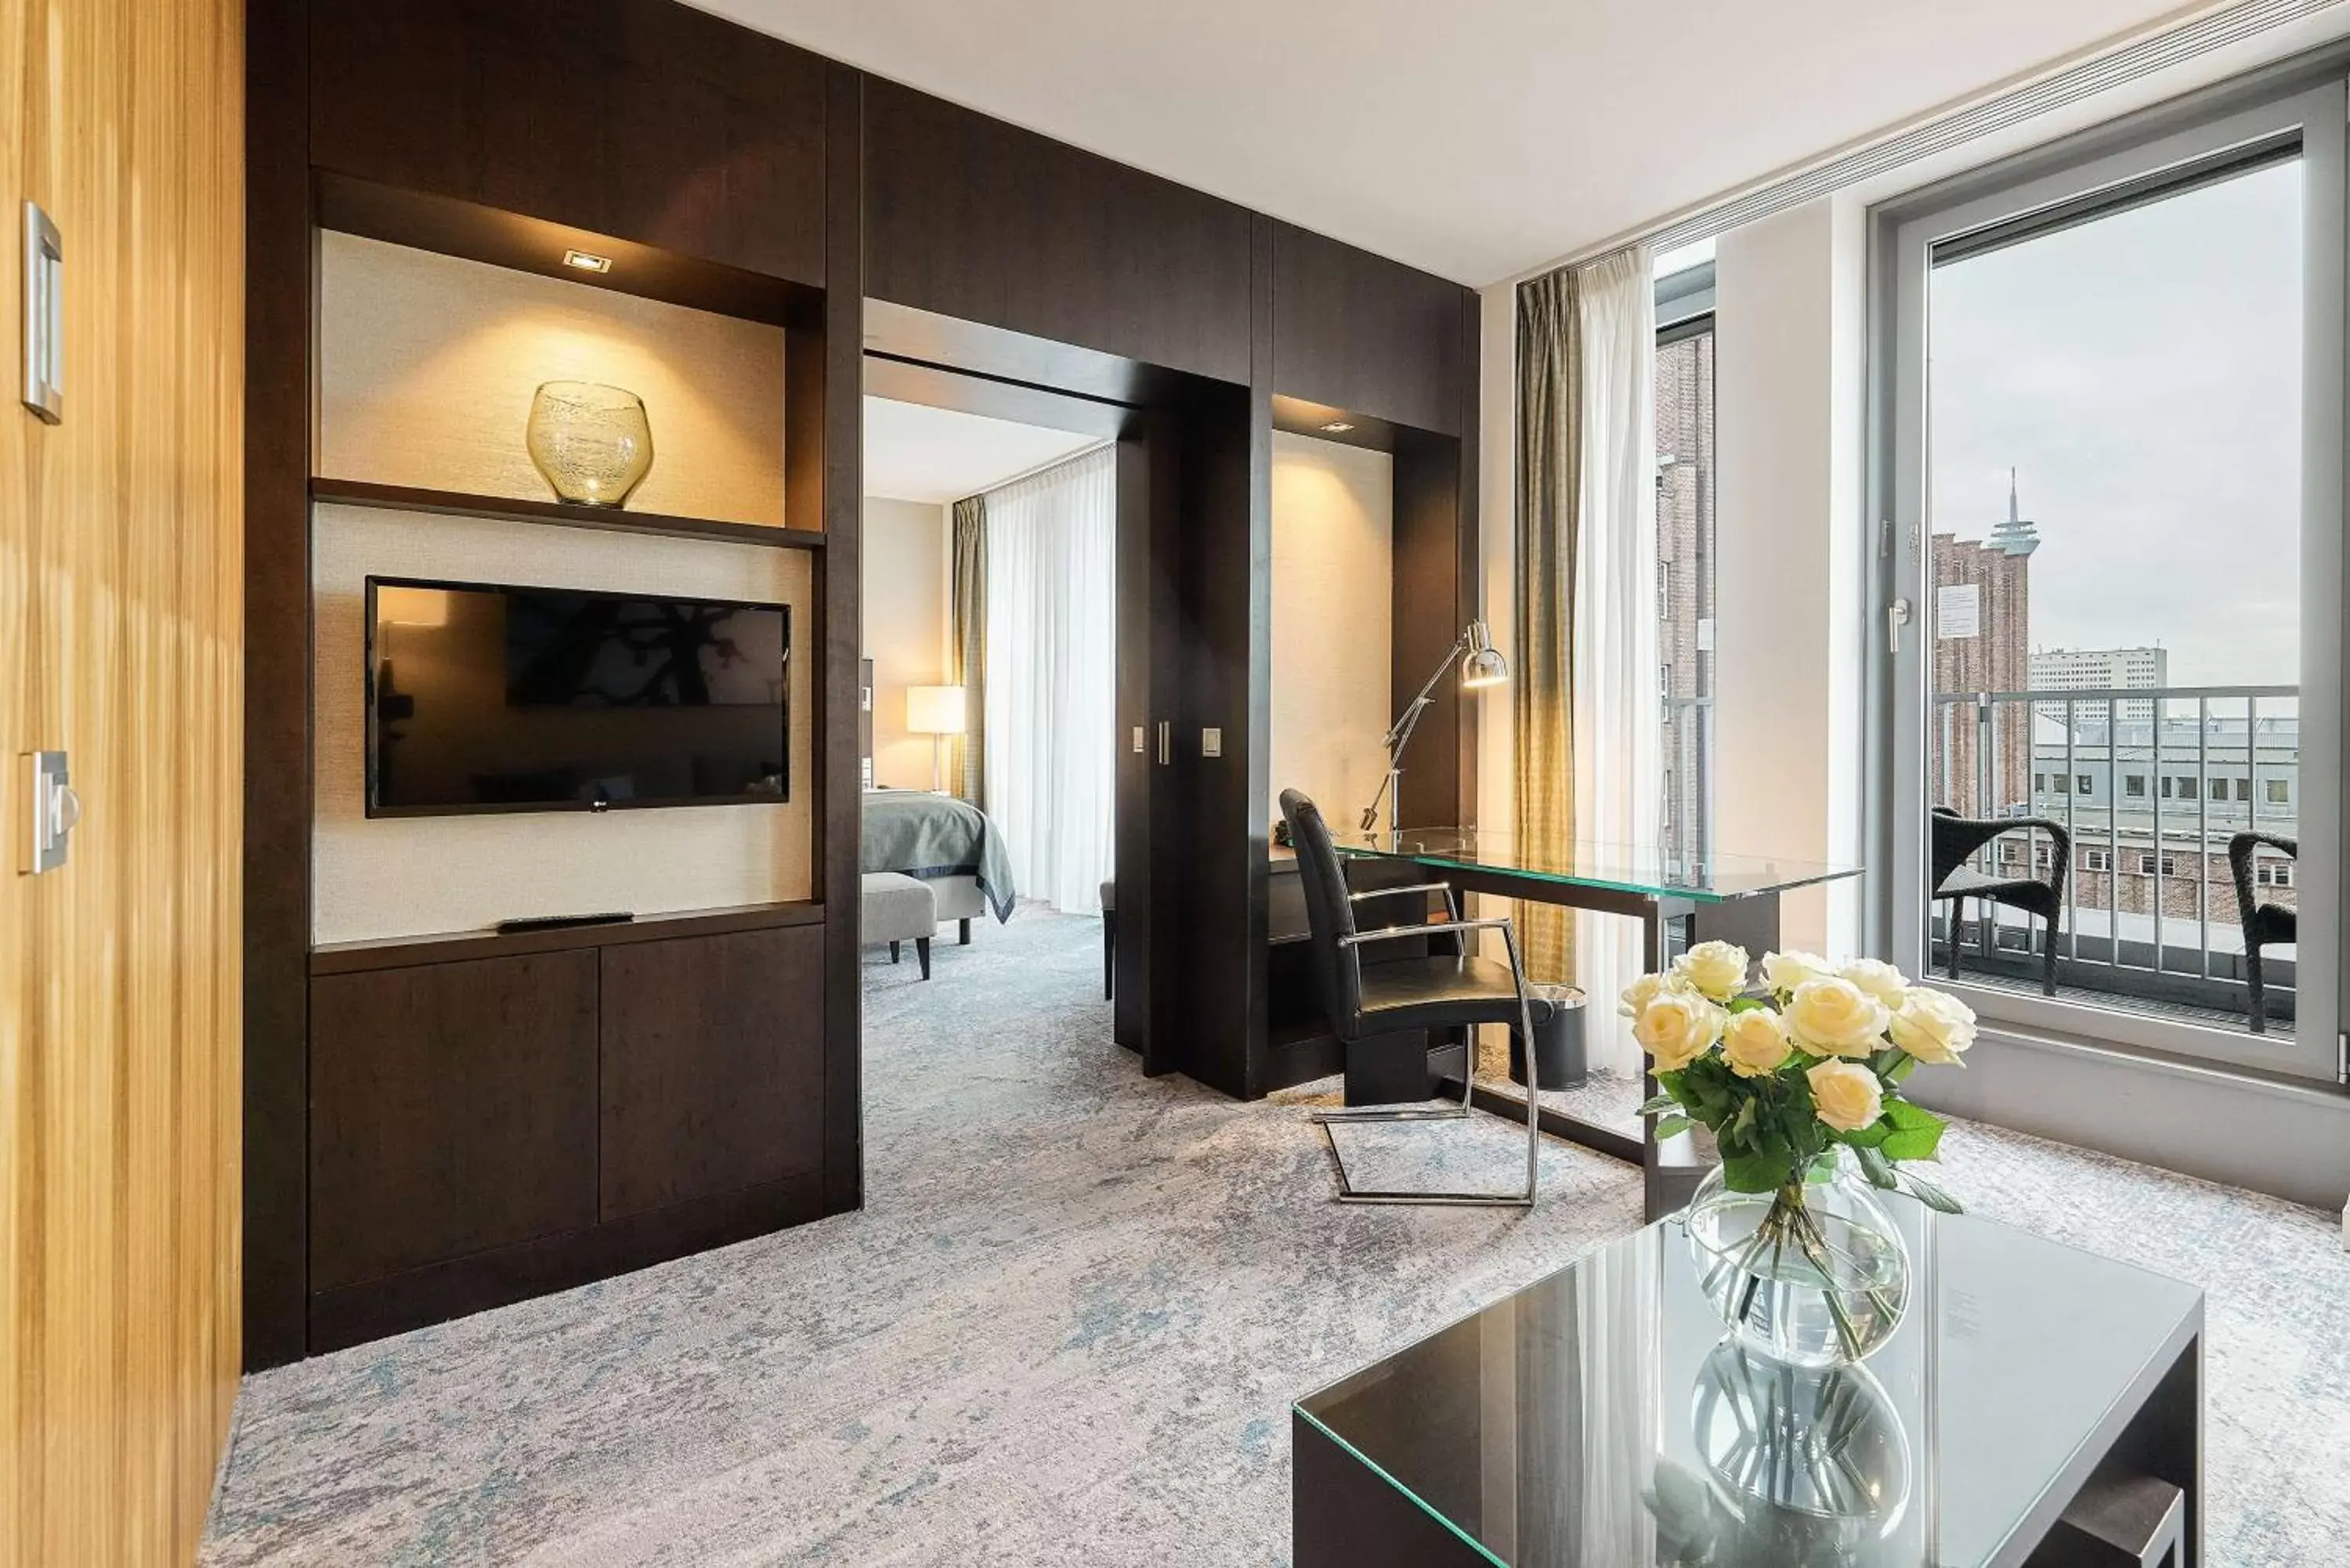 Suite with Balcony in Hotel Kö59 Düsseldorf - Member of Hommage Luxury Hotels Collection